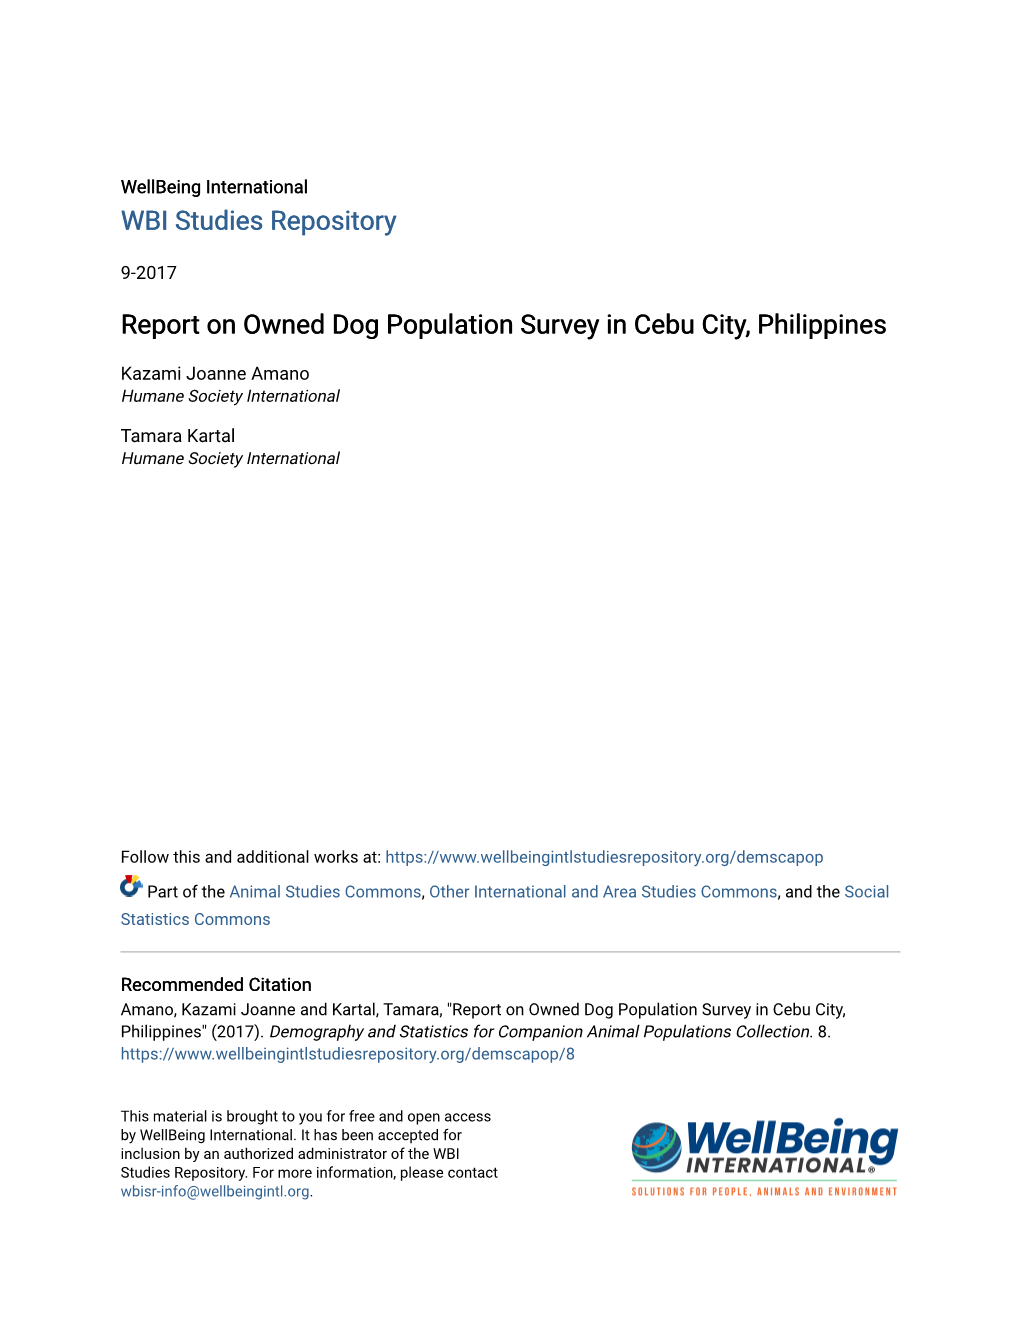 Report on Owned Dog Population Survey in Cebu City, Philippines